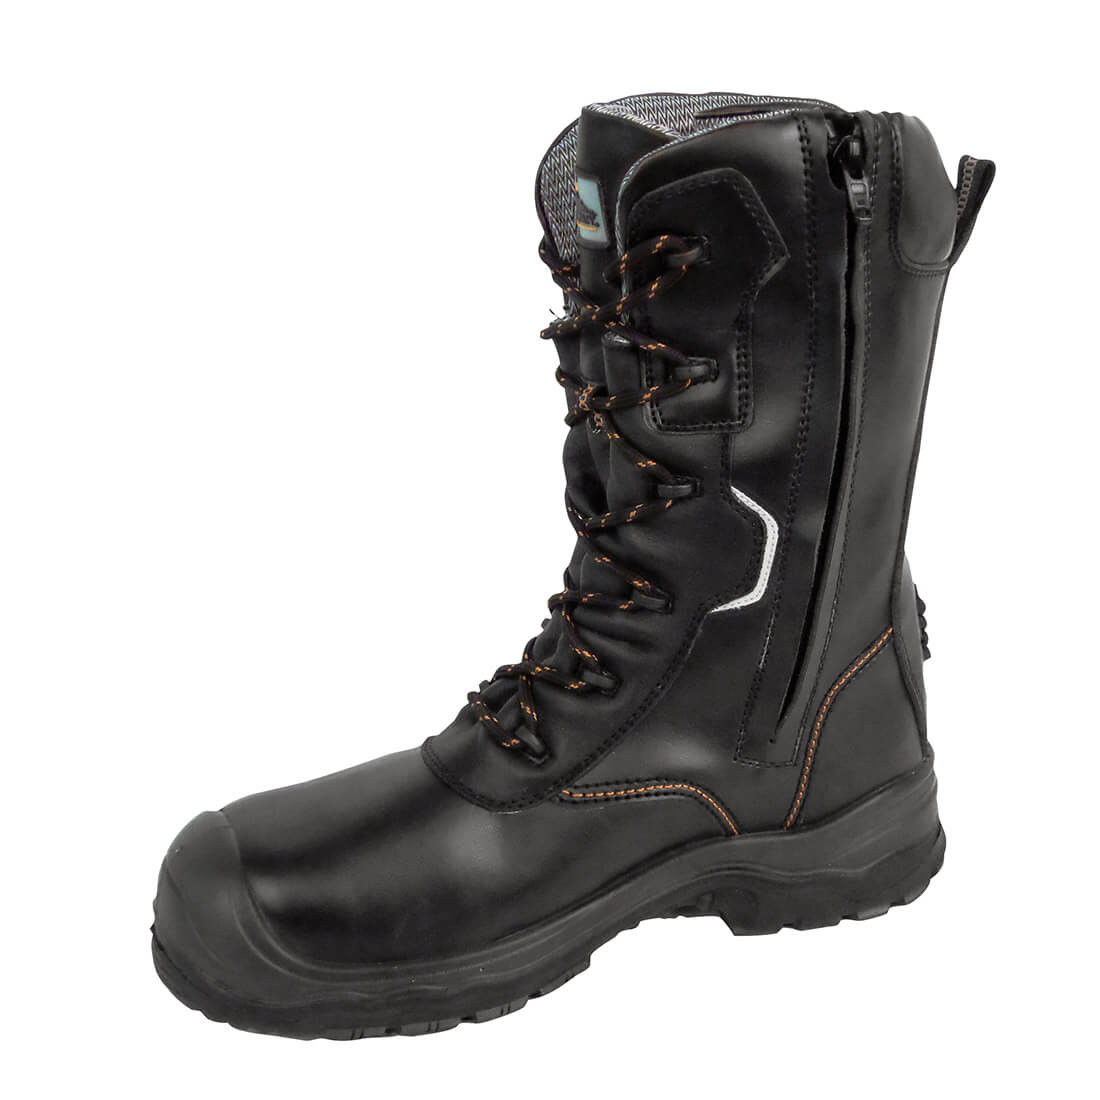 CompositeLite™ Traction 10 inch (25cm) Safety Boot S3 HRO CI WR - Footwear